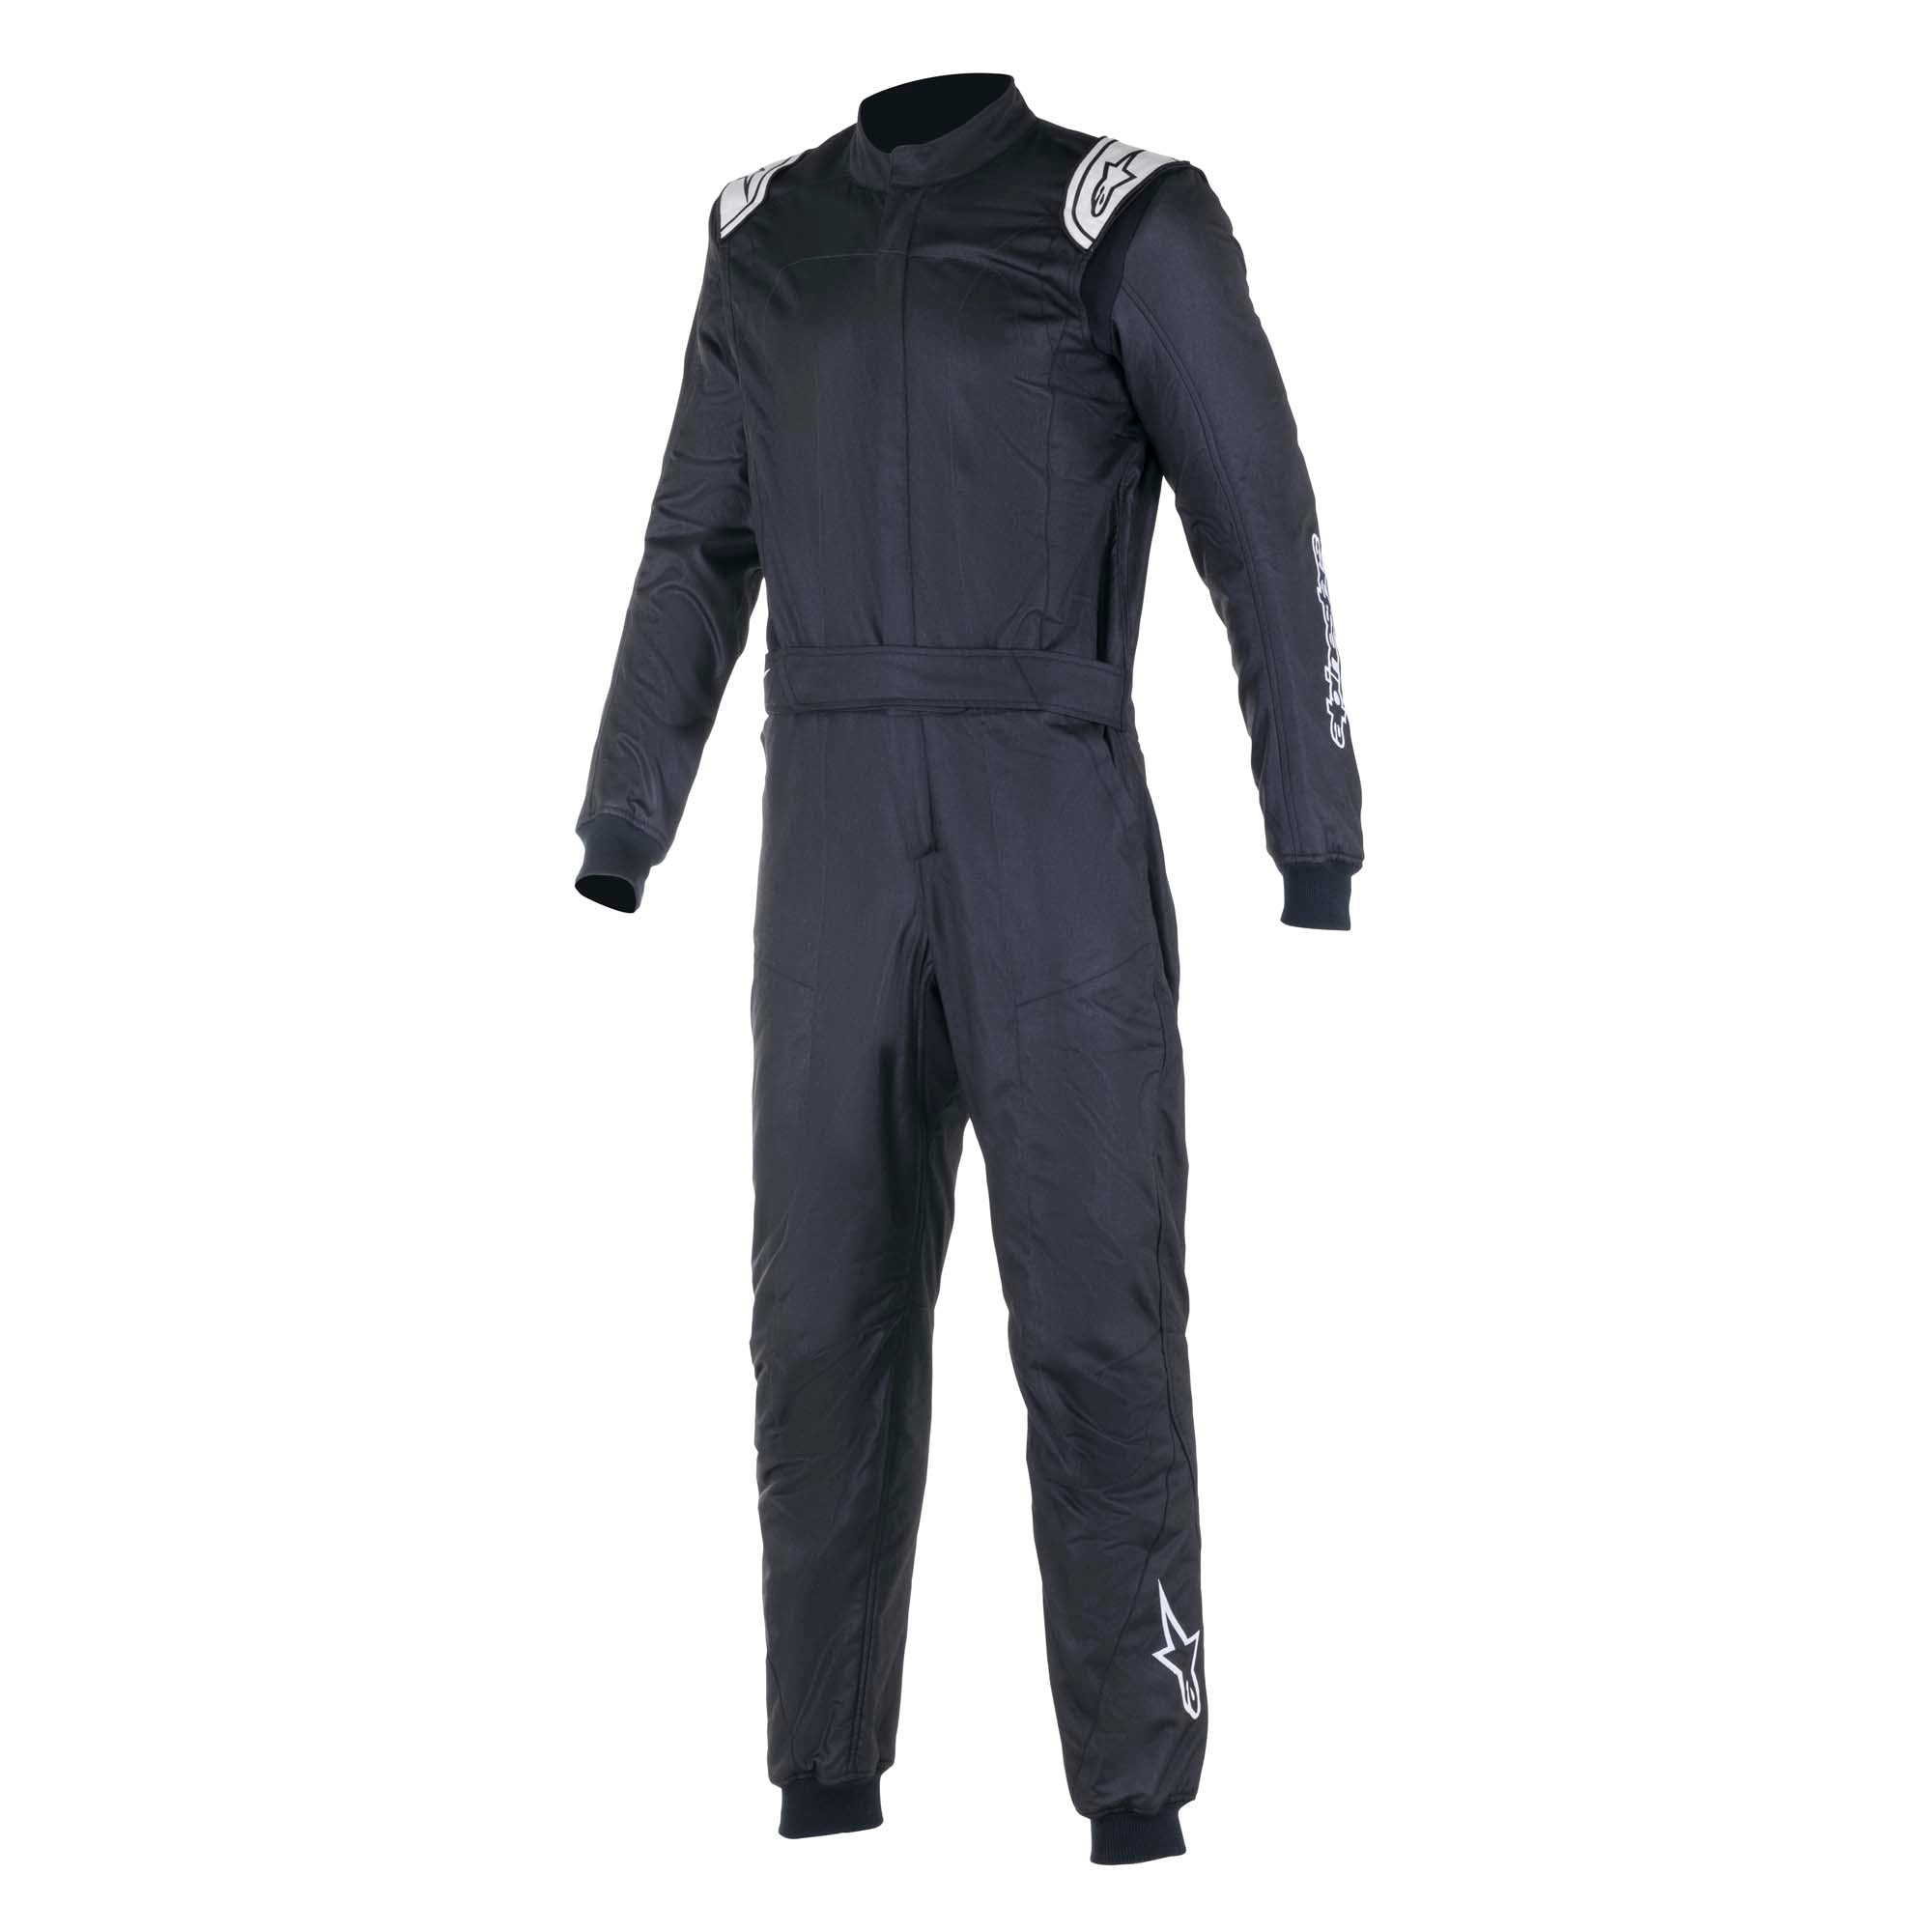 OG Racing Official Site for Auto Racing Safety Gear